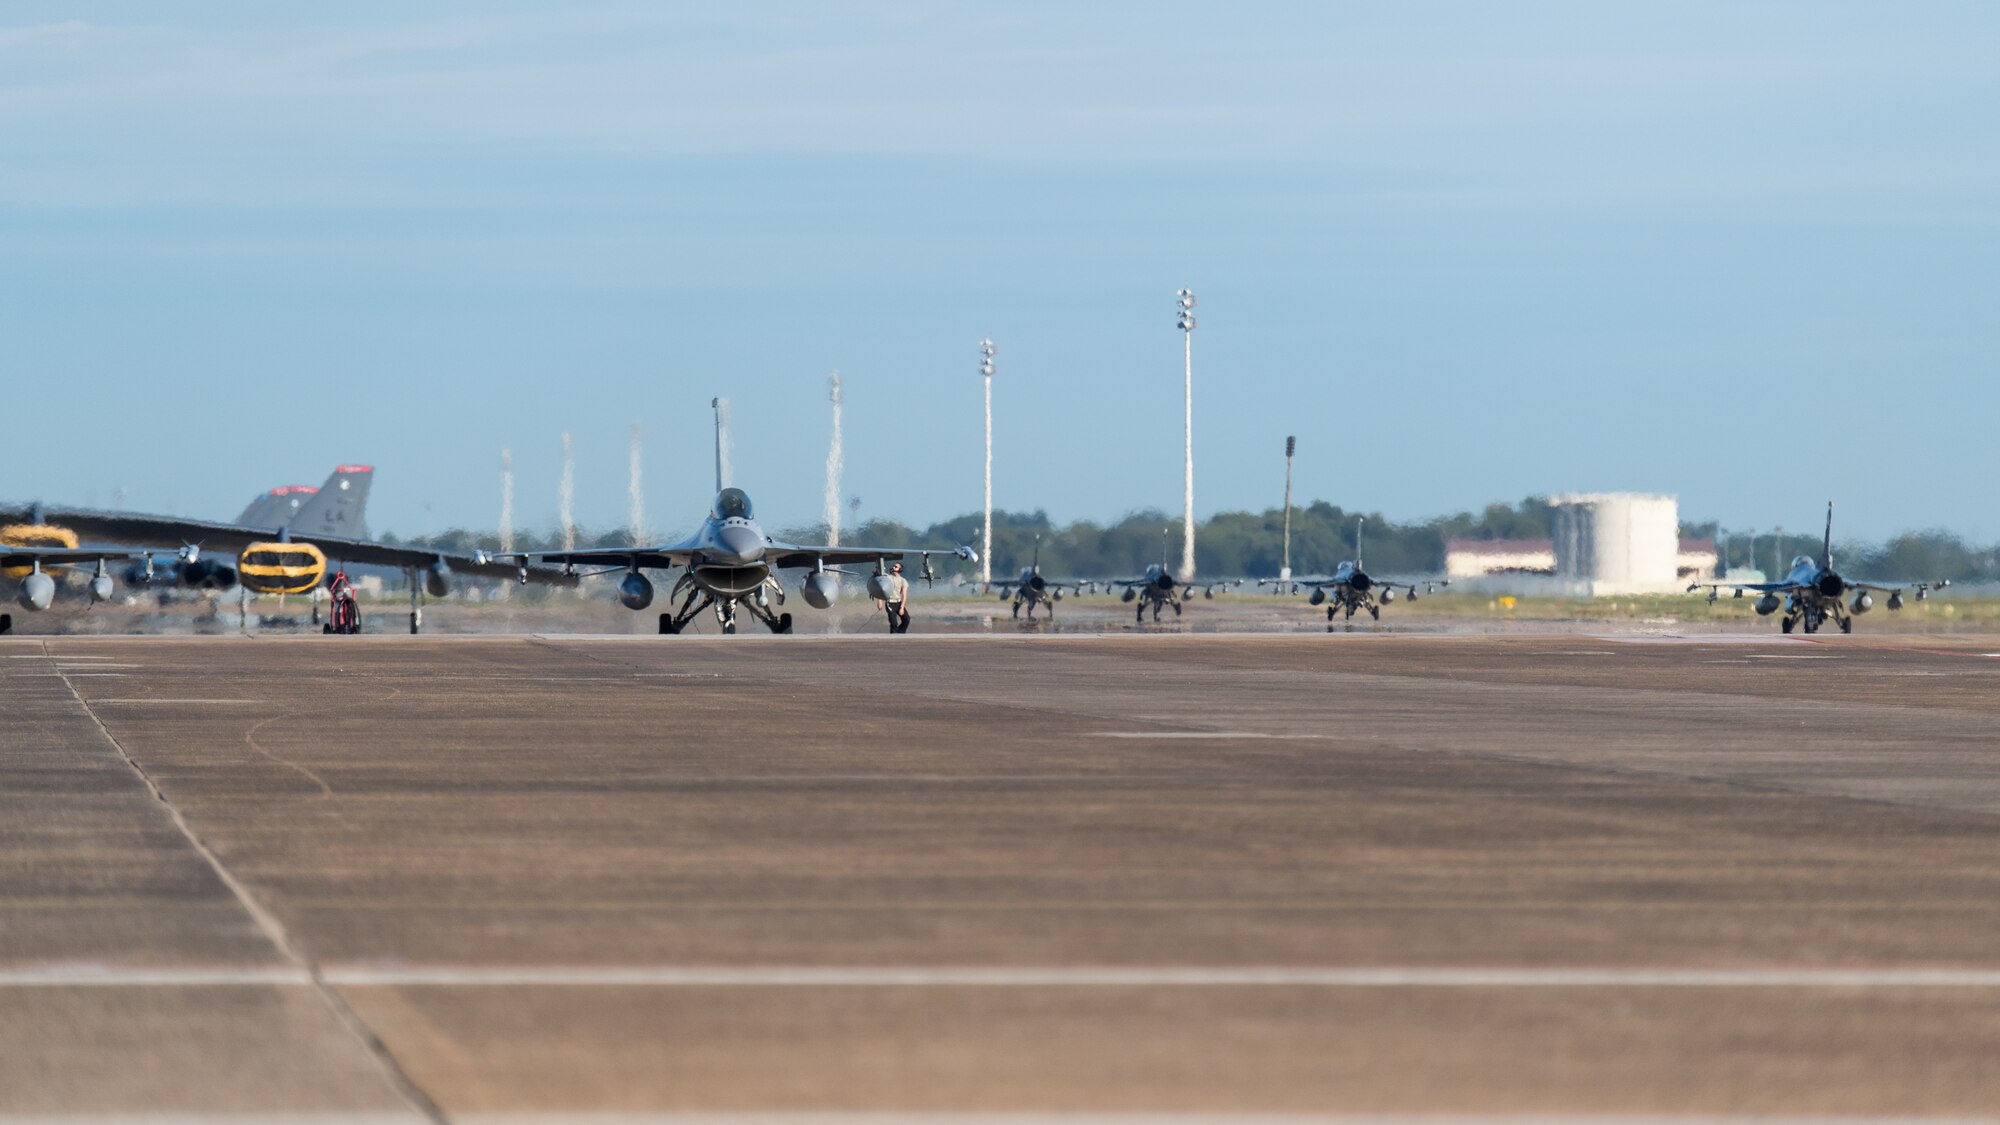 F-35 Lightning aircraft from Eglin Air Force Base, Fla., prepare for takeoff at Barksdale Air Force Base, La., Oct. 12, 2018. The aircraft evacuated to Barksdale to avoid possible damage from Hurricane Michael. (U.S. Air Force photo by Airman 1st Class Lillian Miller)